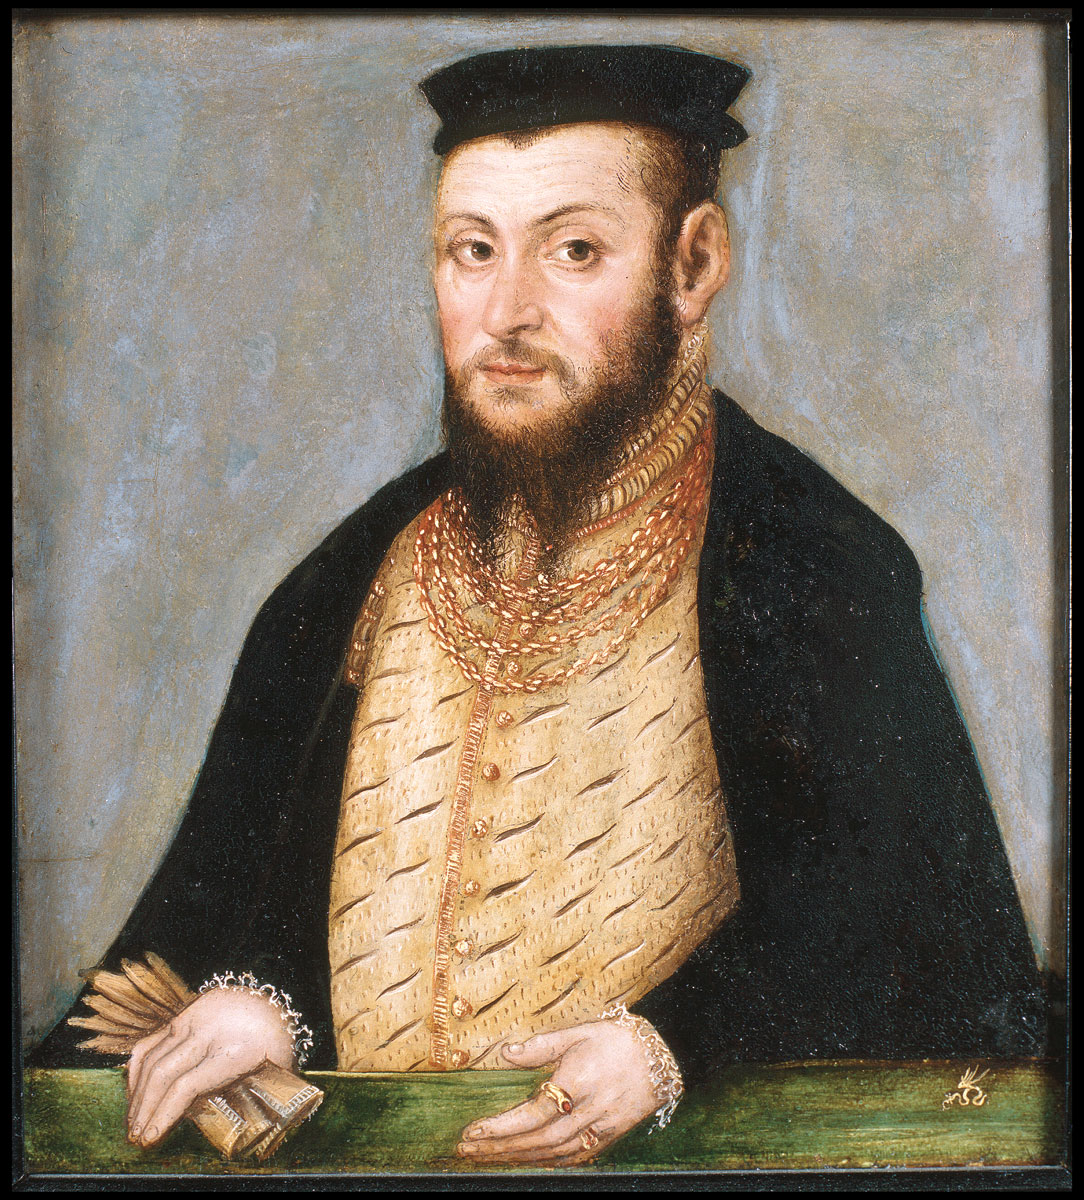 The King of Poland and Grand Duke of Lithuania, Sigismund II August. Circa 1565. The studio of Lucas Cranach the Younger. FCzart